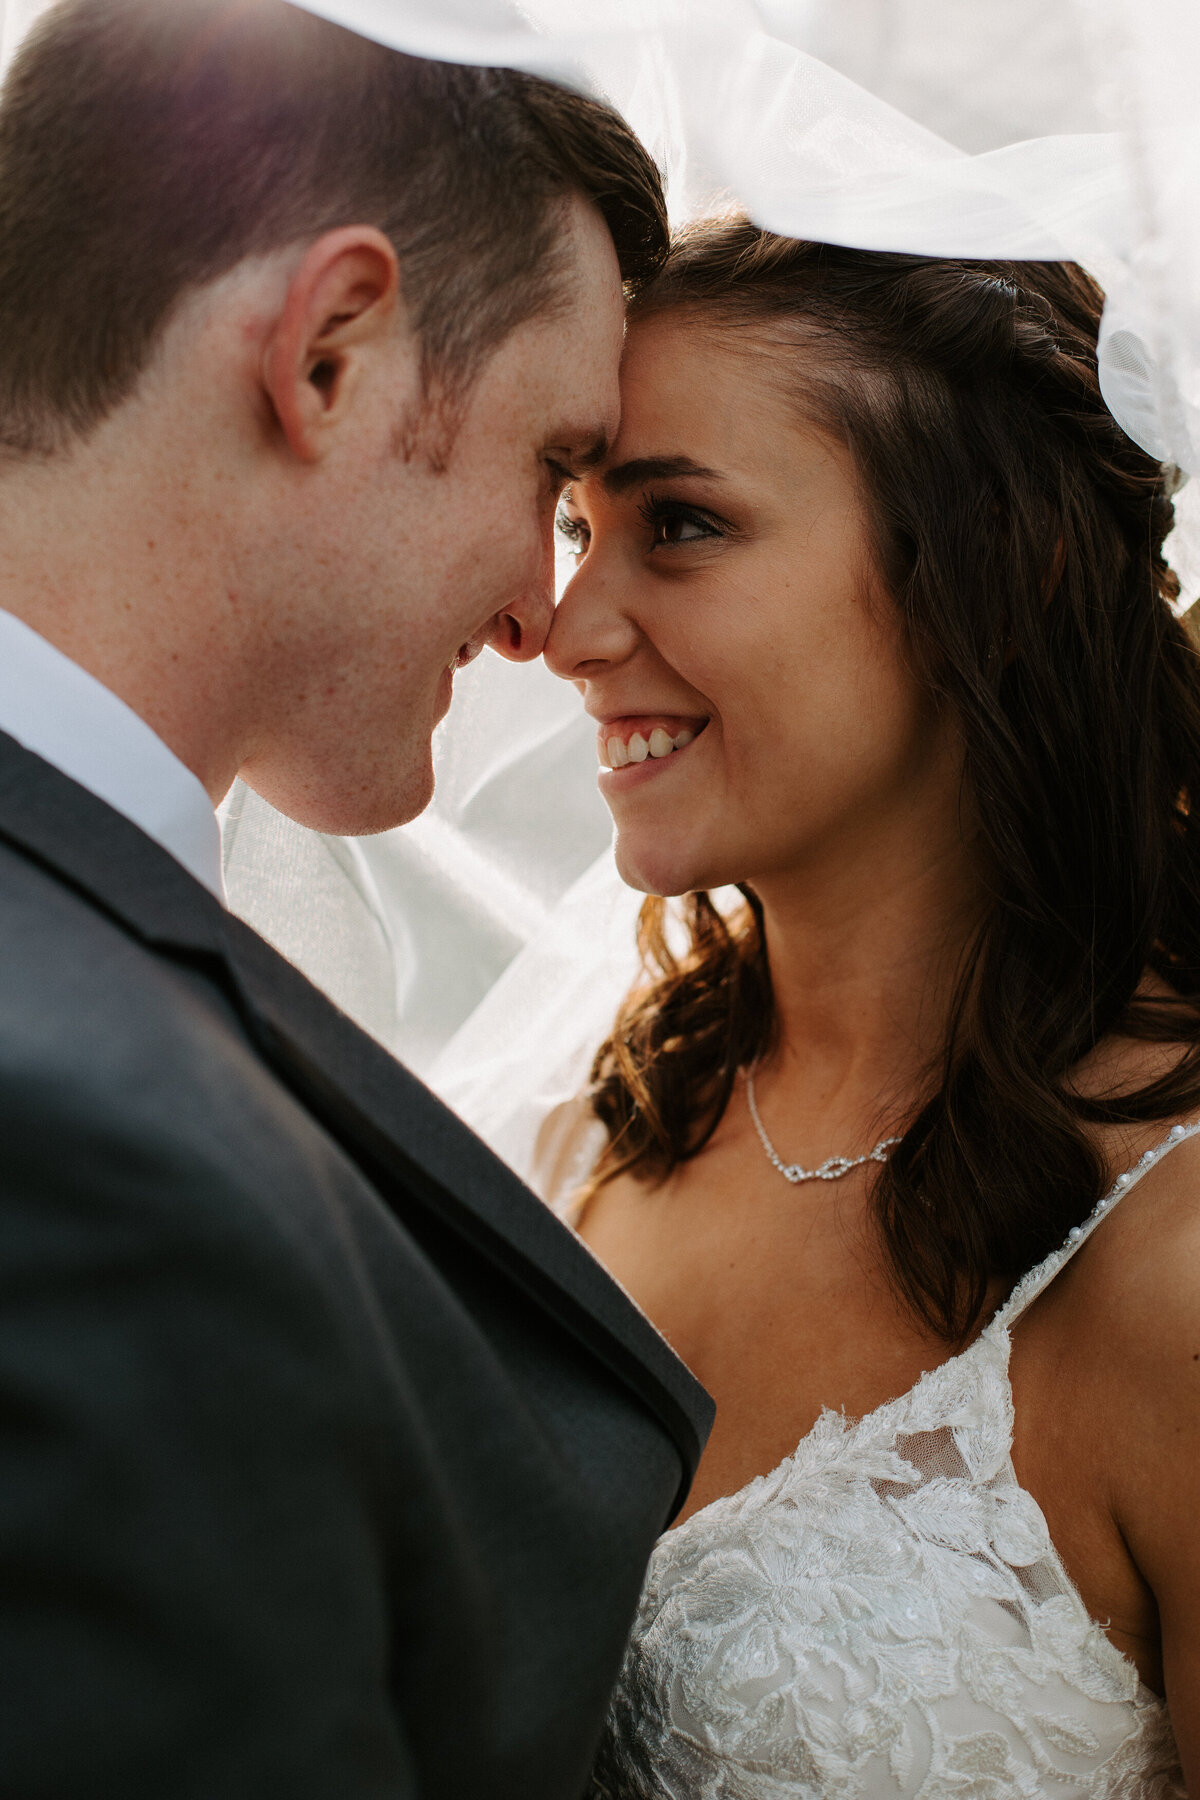 bride and groom smiling and touching foreheads as a veil drapes over them